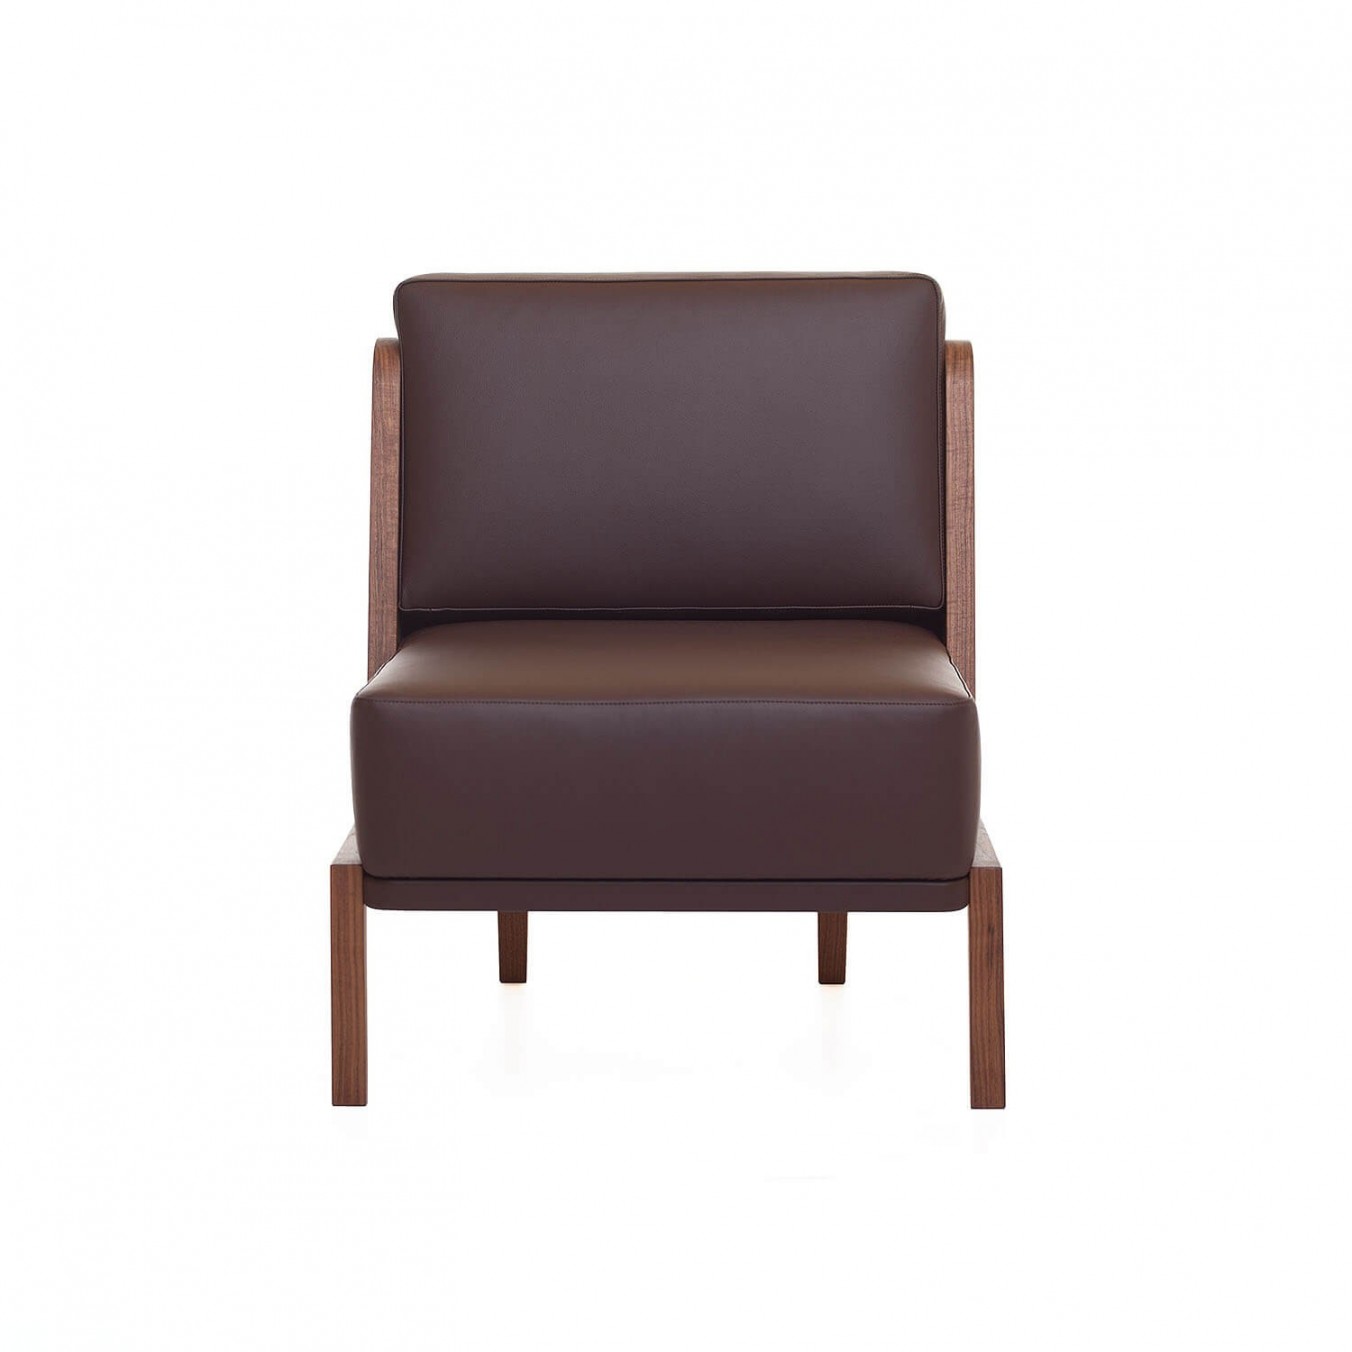 THRONE LOUNGE CHAIR WITH UPHOLSTERY